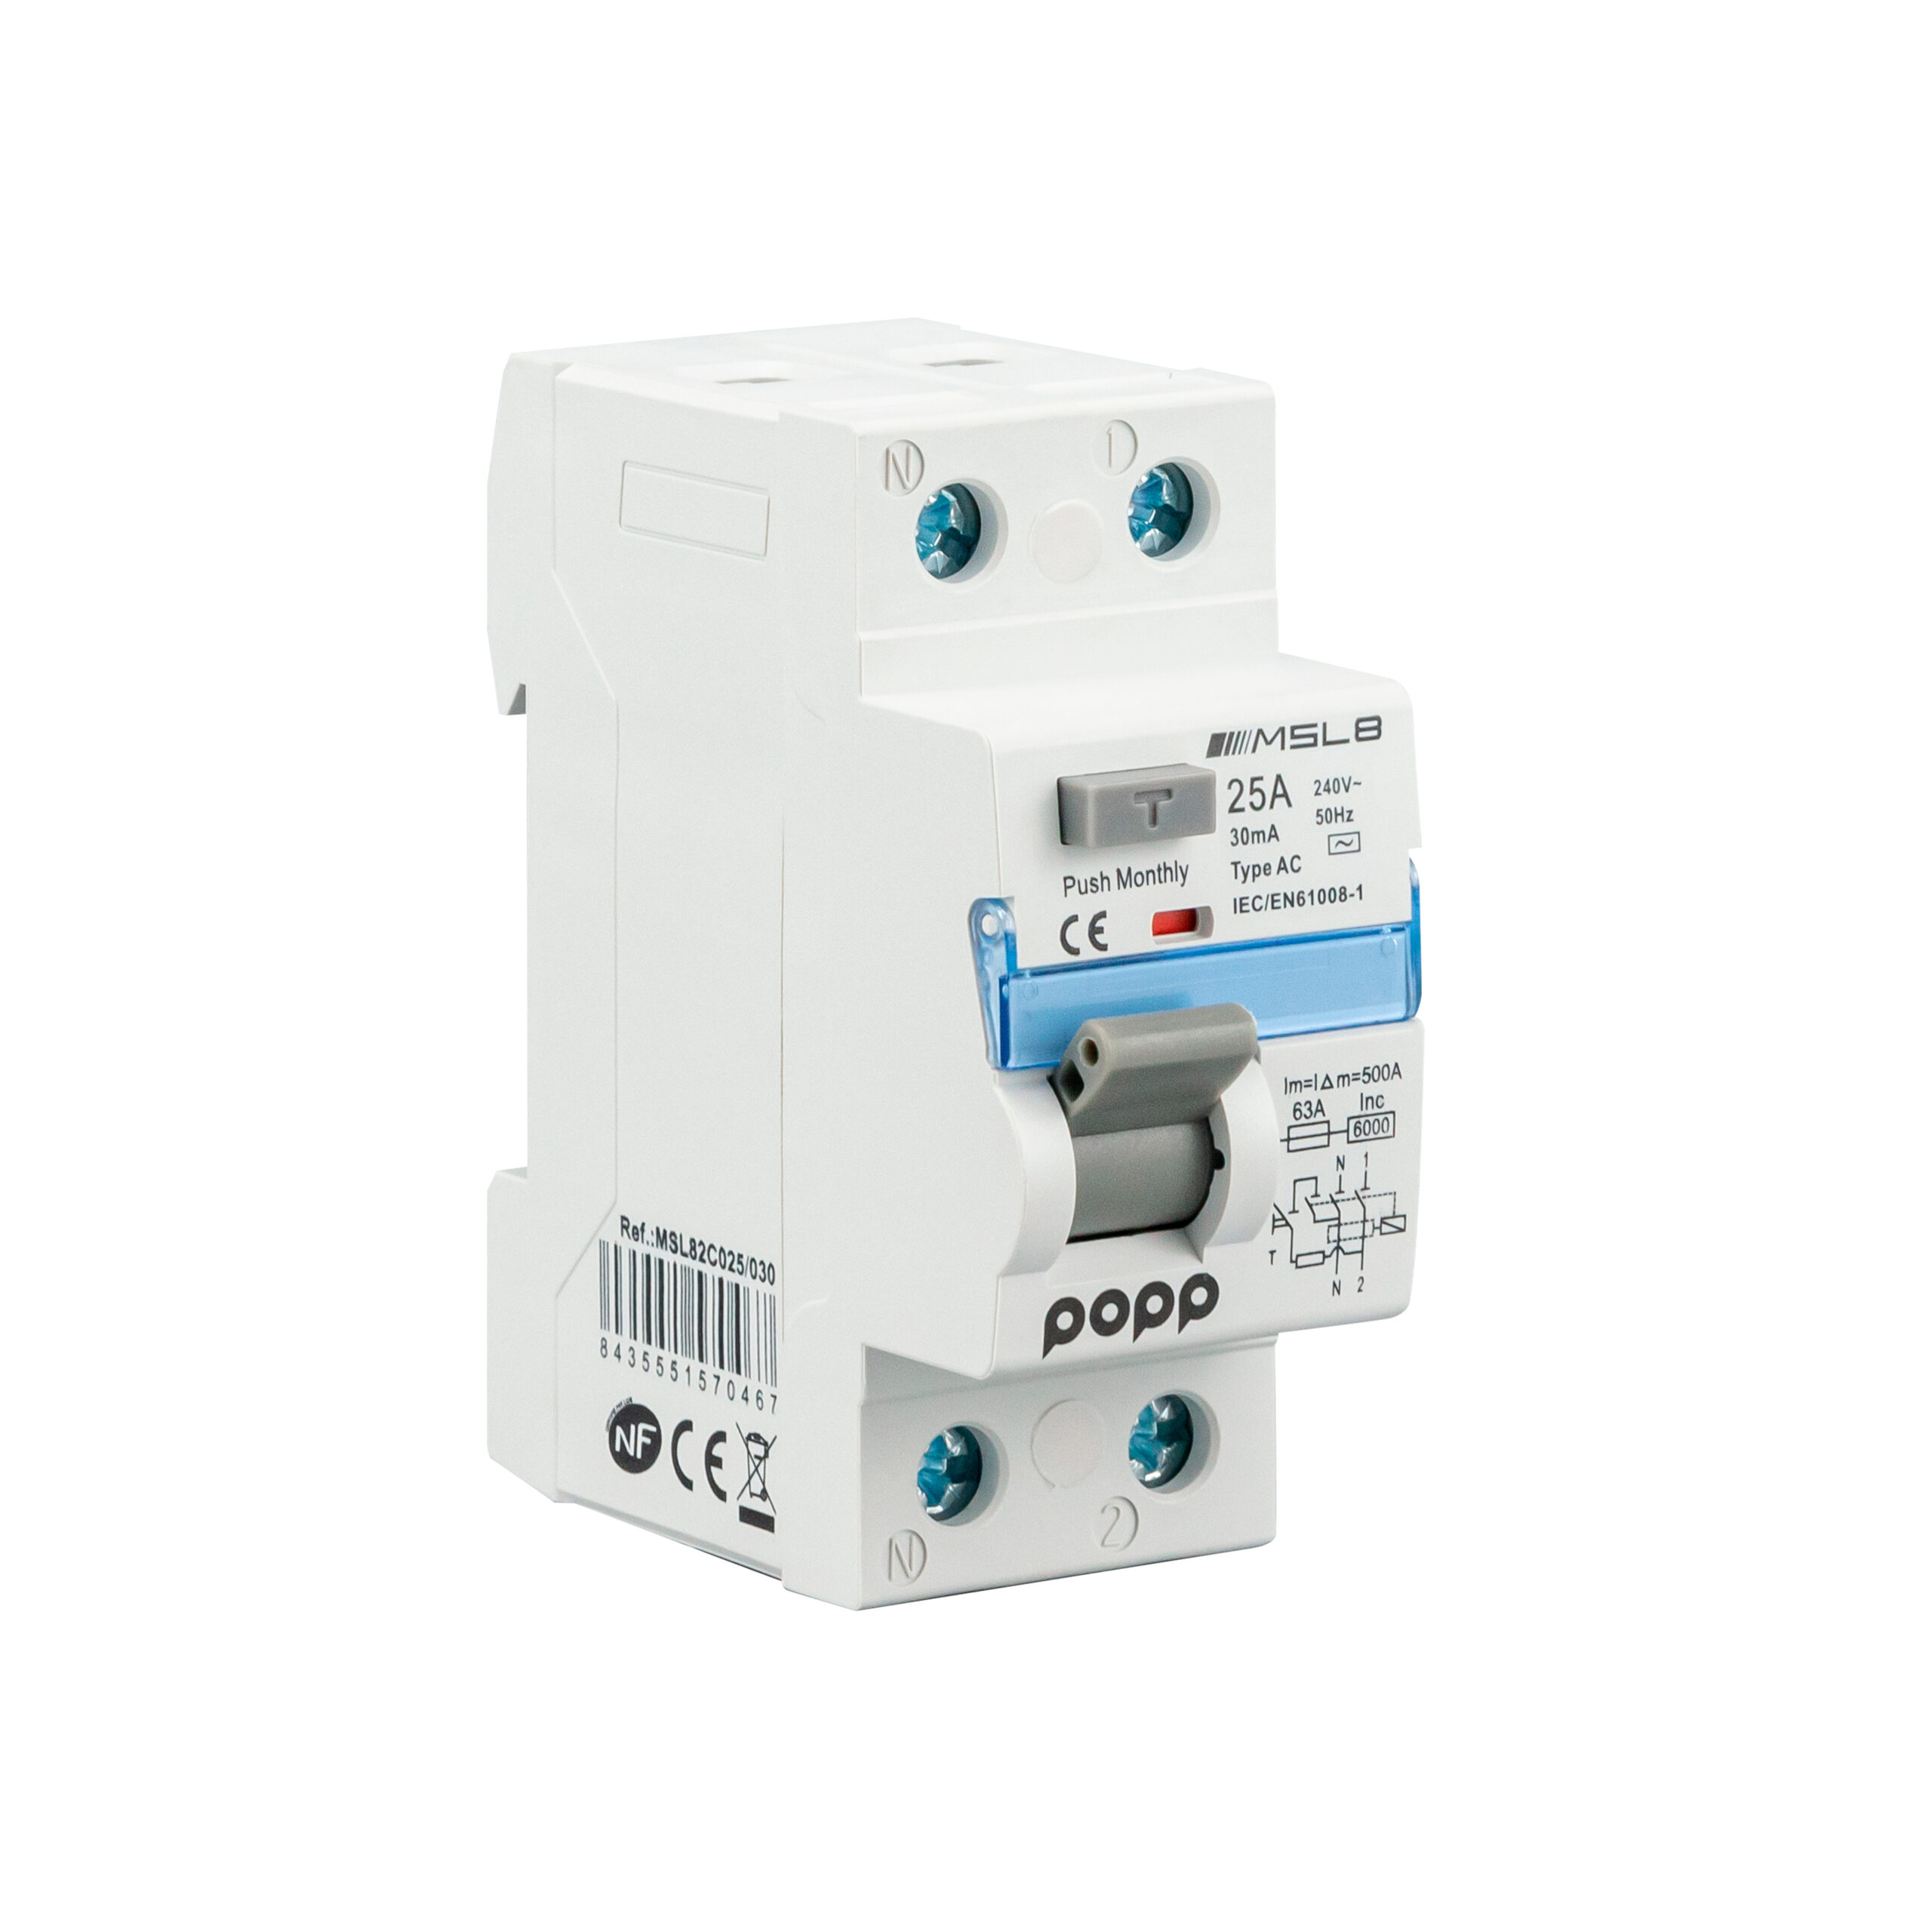 Interruptor 1P+N 25A 30mA diferencial serie MSL8 gama industrial